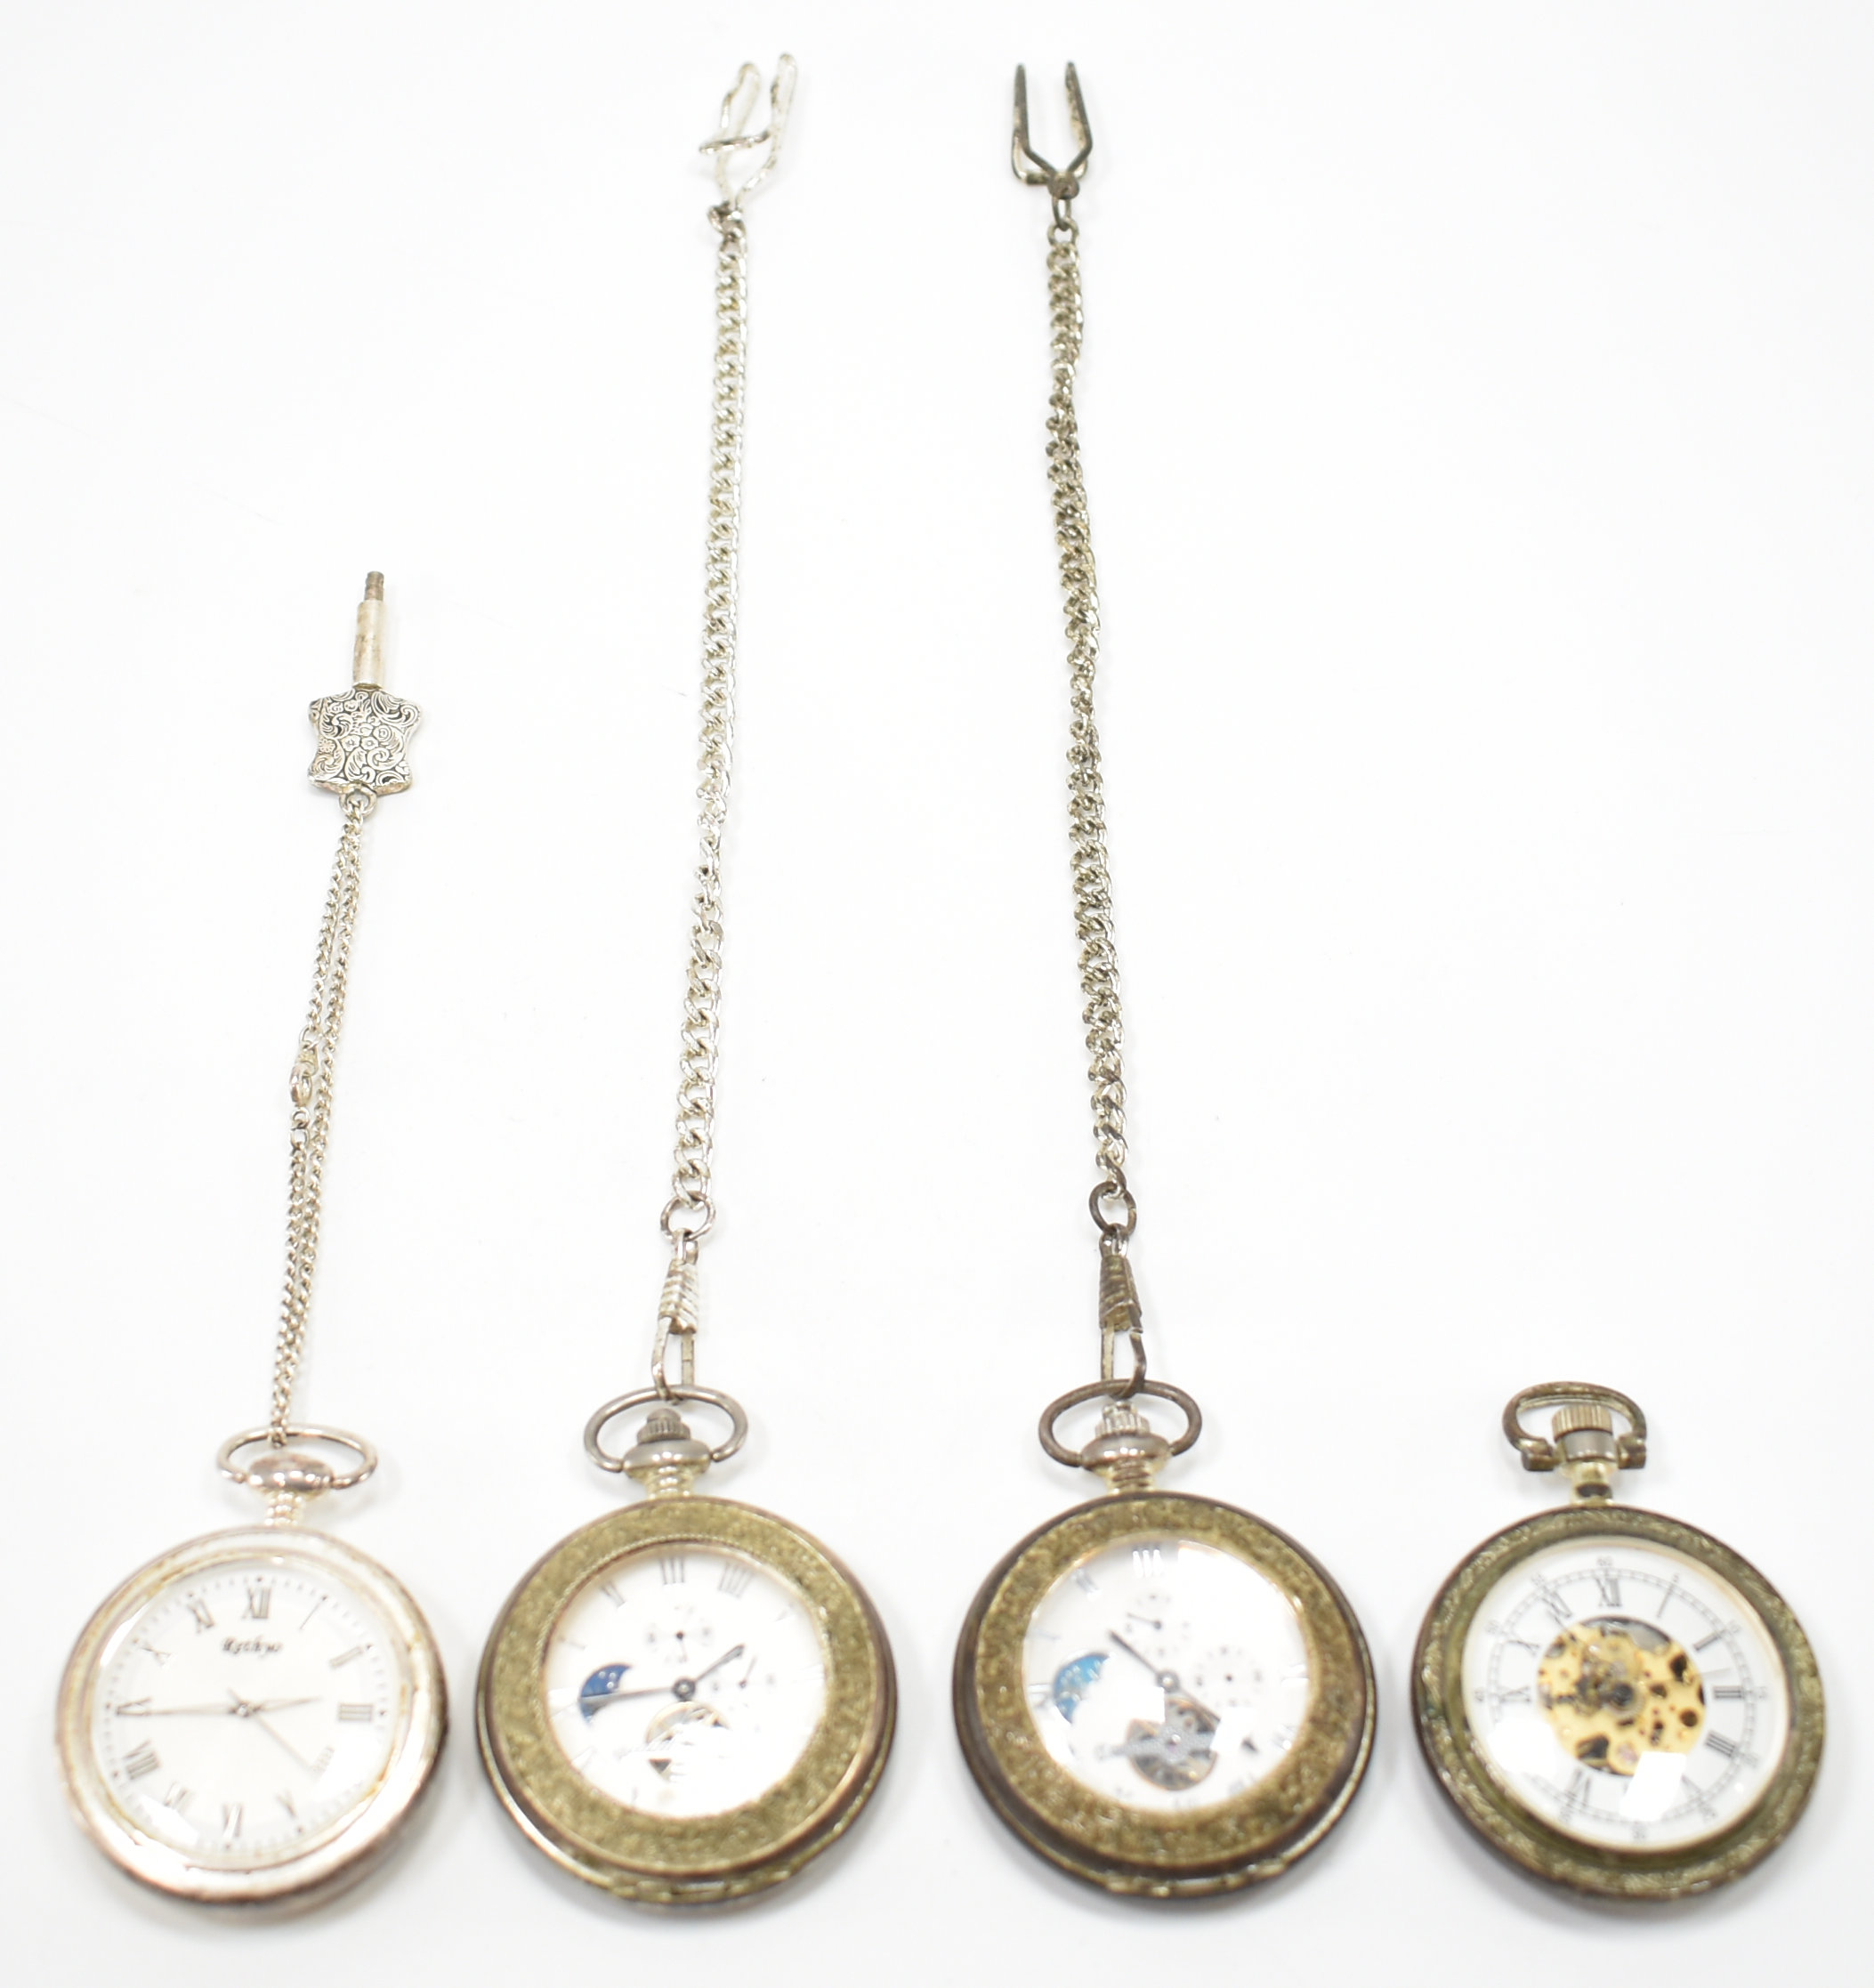 FOUR CONTEMPORARY POCKET WATCHES - Image 4 of 5